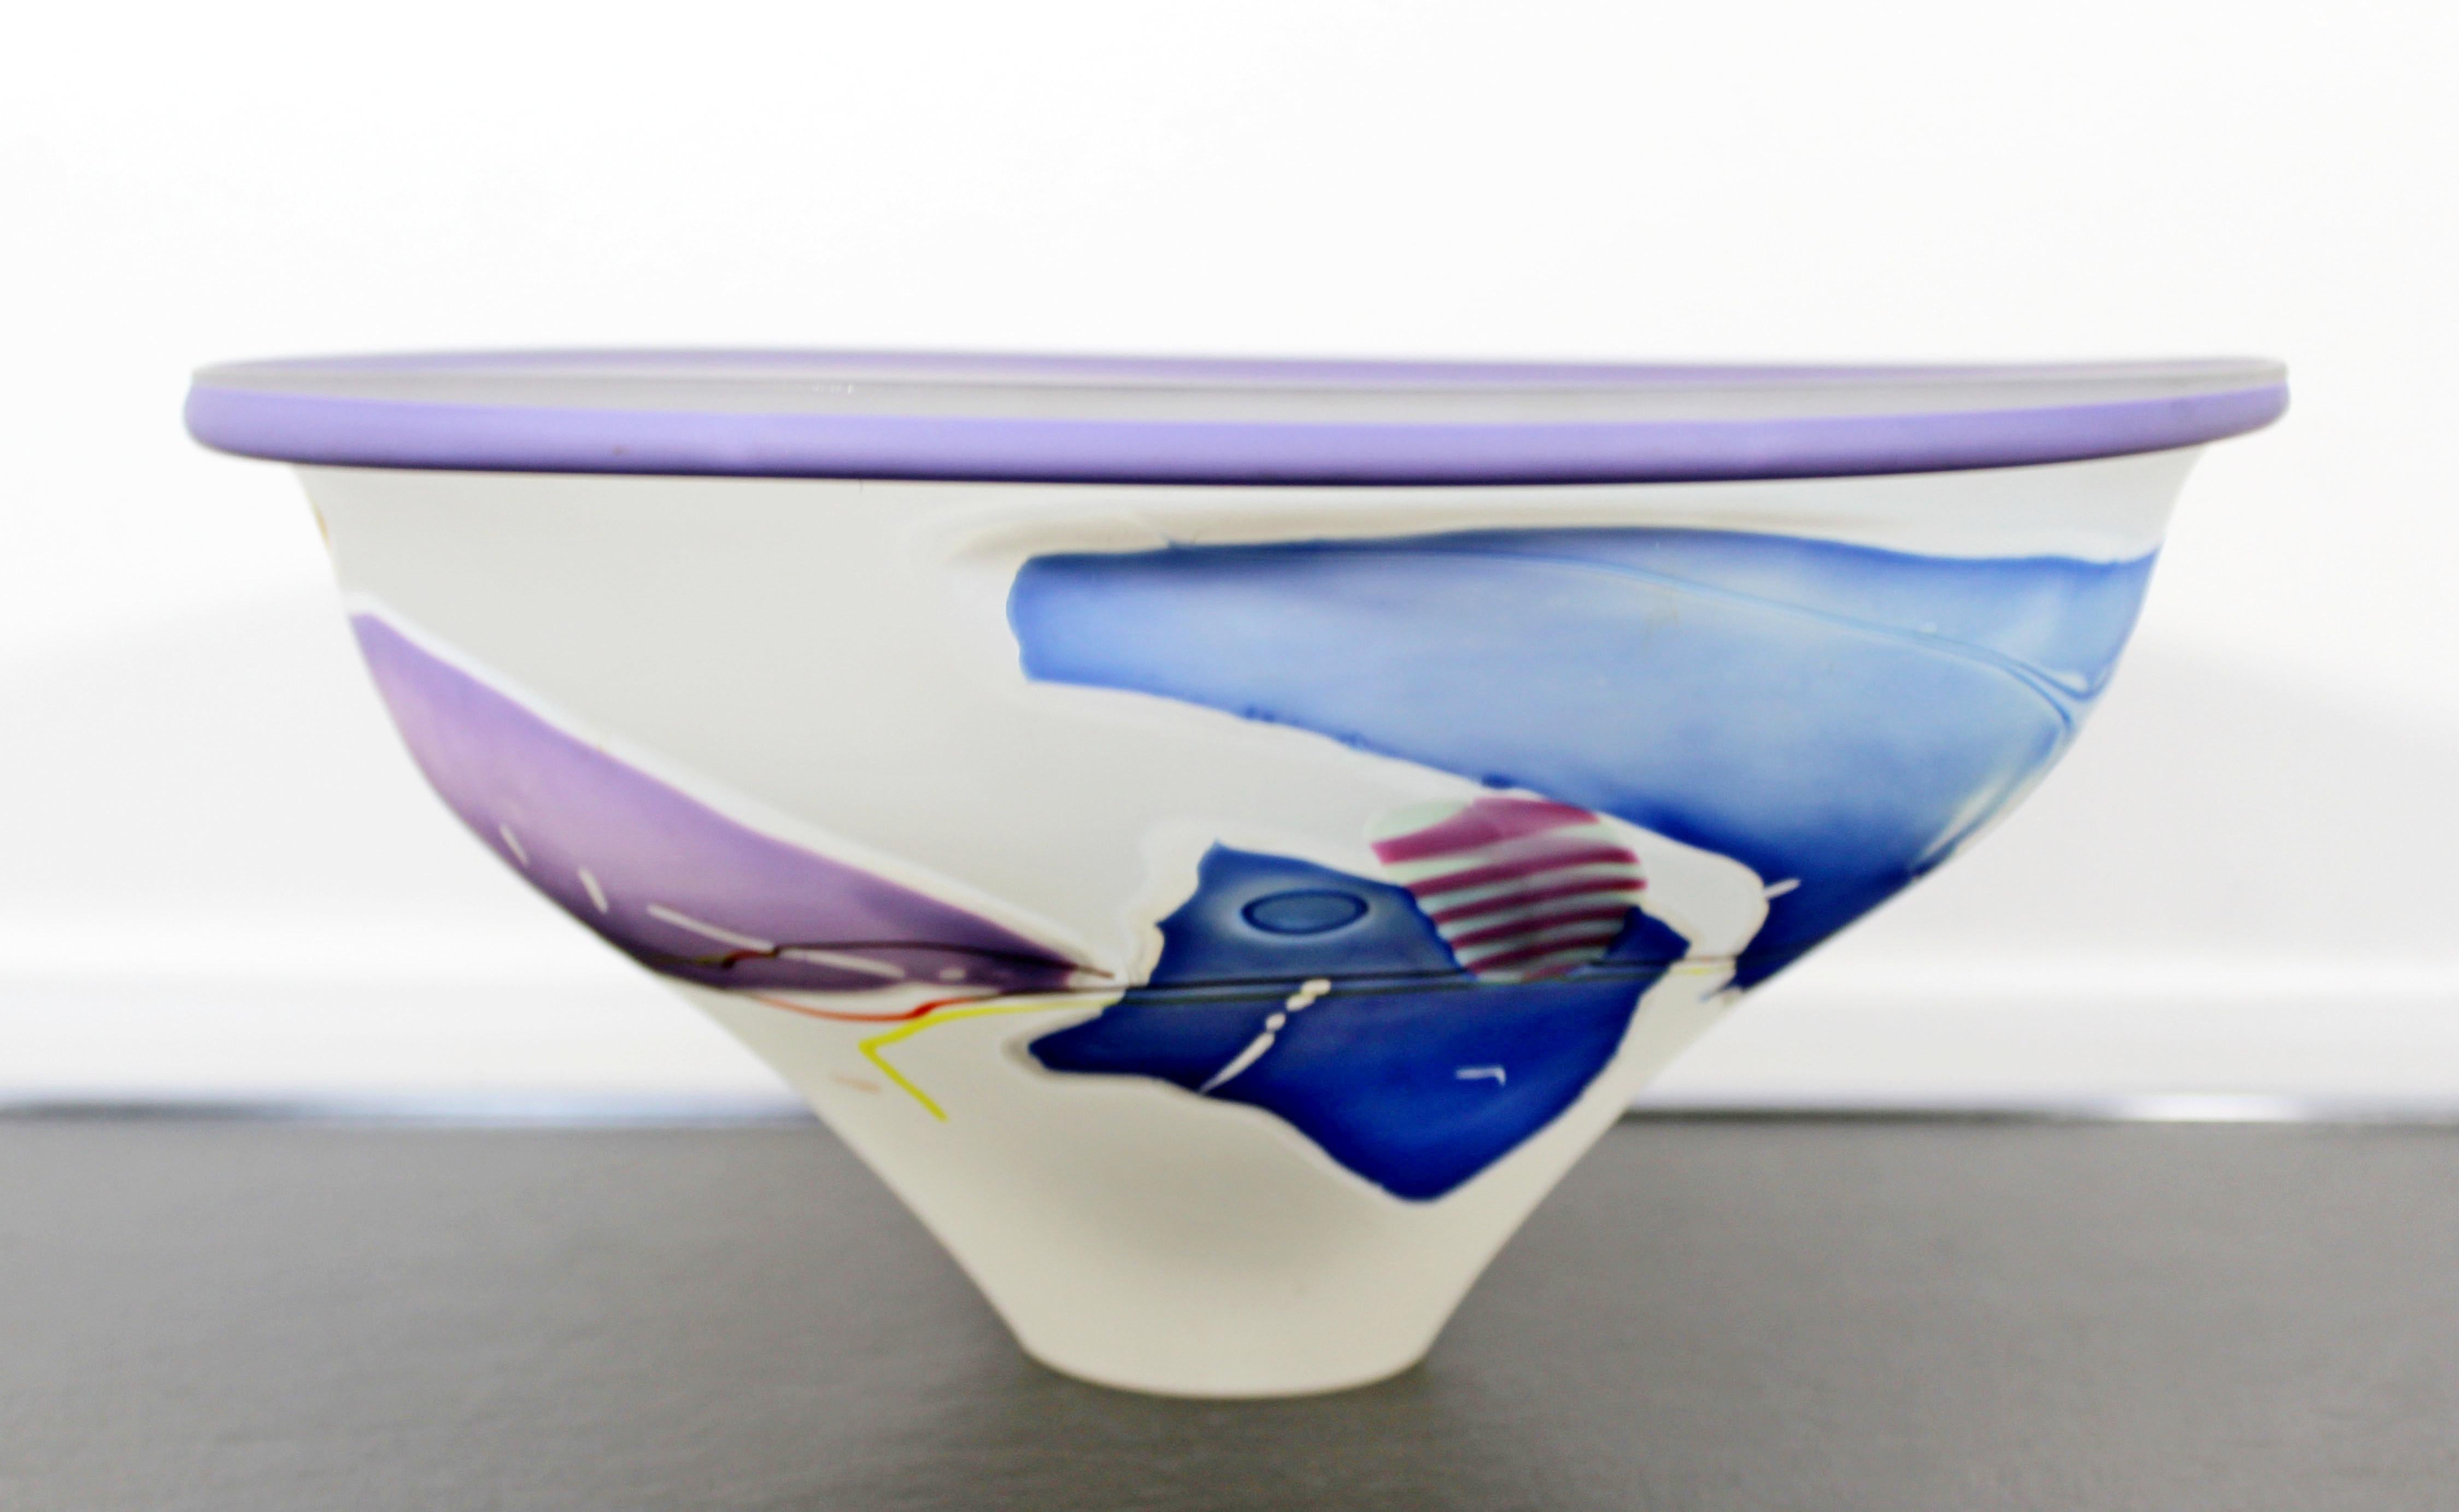 American Contemporary Modern Frosted Multi-Color Glass Art Bowl Signed James Wilbat, 1990